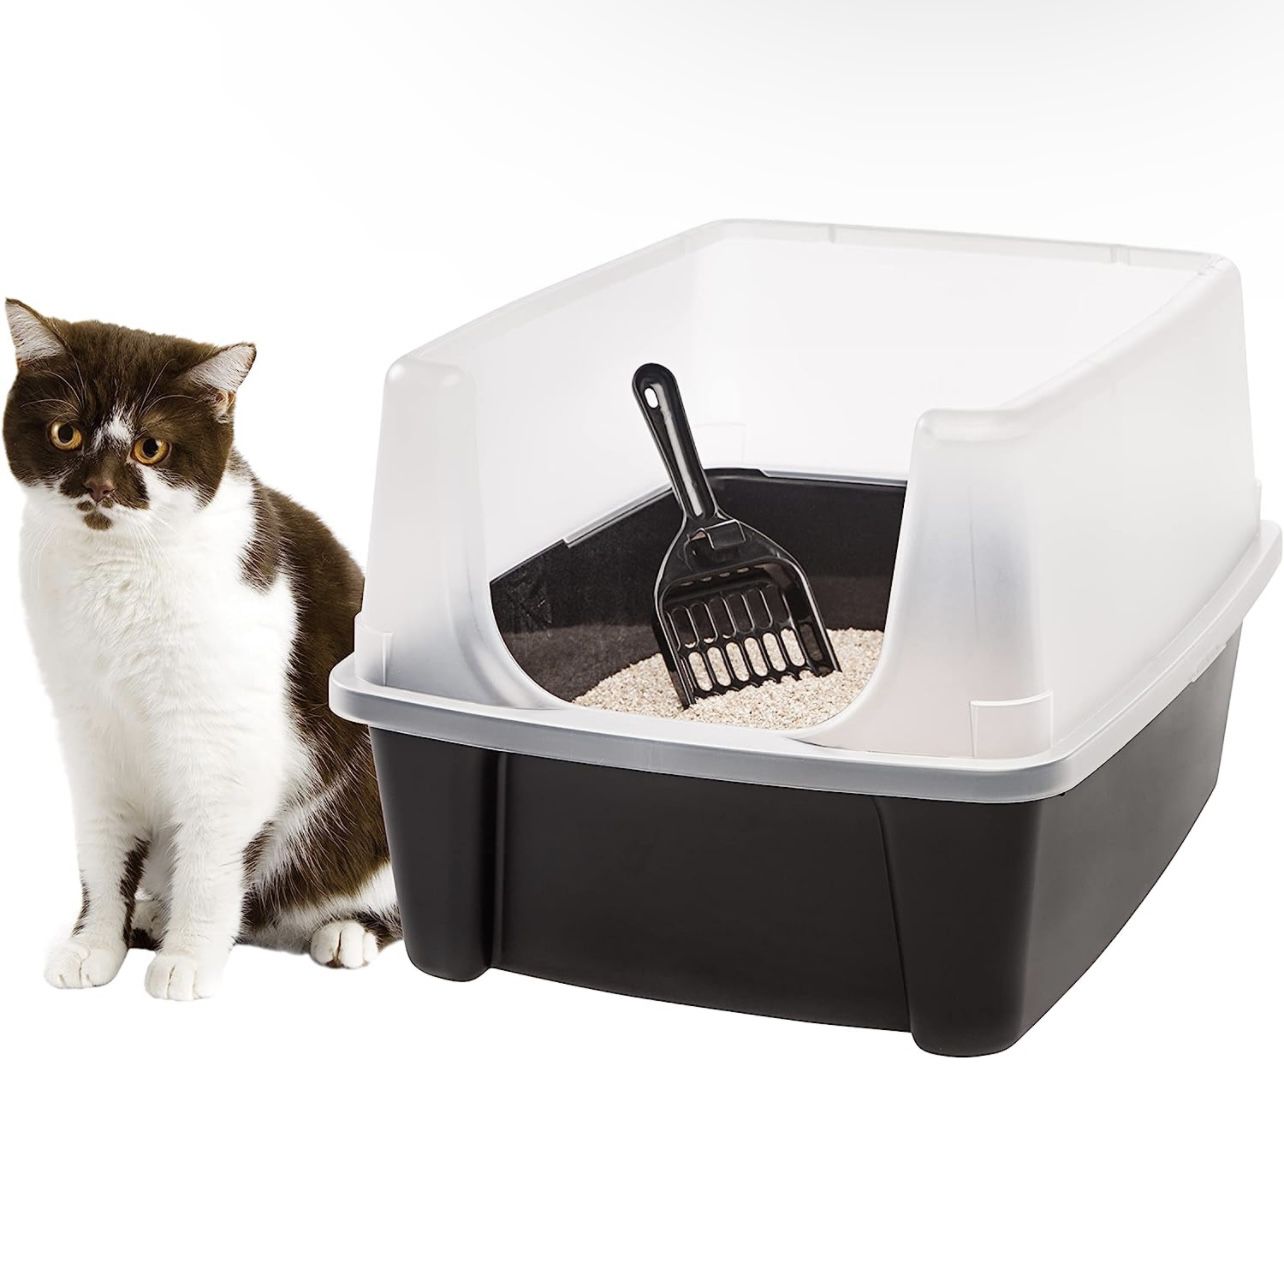 NEW IRIS USA IRIS USA Open Top Cat Litter Tray with Scoop and Scatter Shield